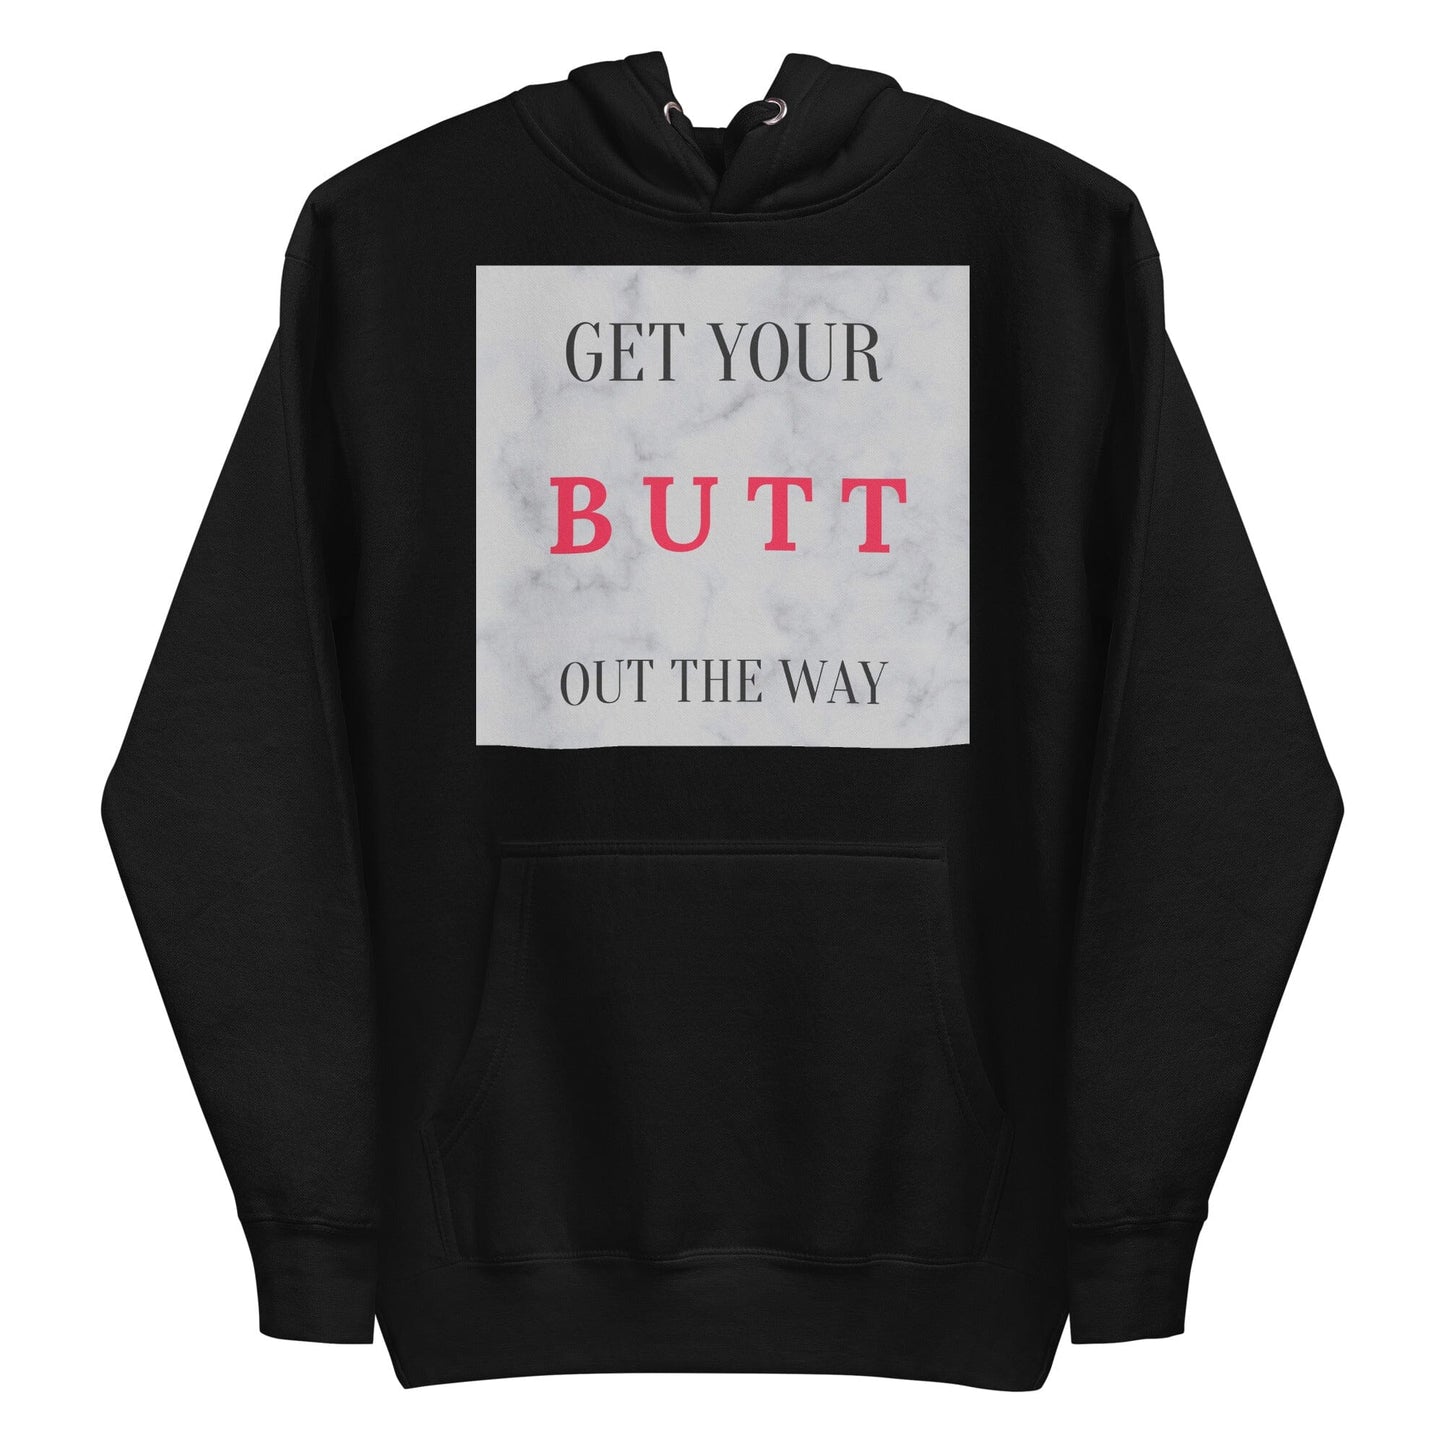 This Get Your BUTT Out the Way Hoodie is perfect for any active lifestyle. With its lightweight and breathable fabric, it's perfect for cooler weather. The 100% Cotton fabric keeps you comfortable and warm during your activities. Its moisture-wicking technology keeps you dry and feeling fresh all day.